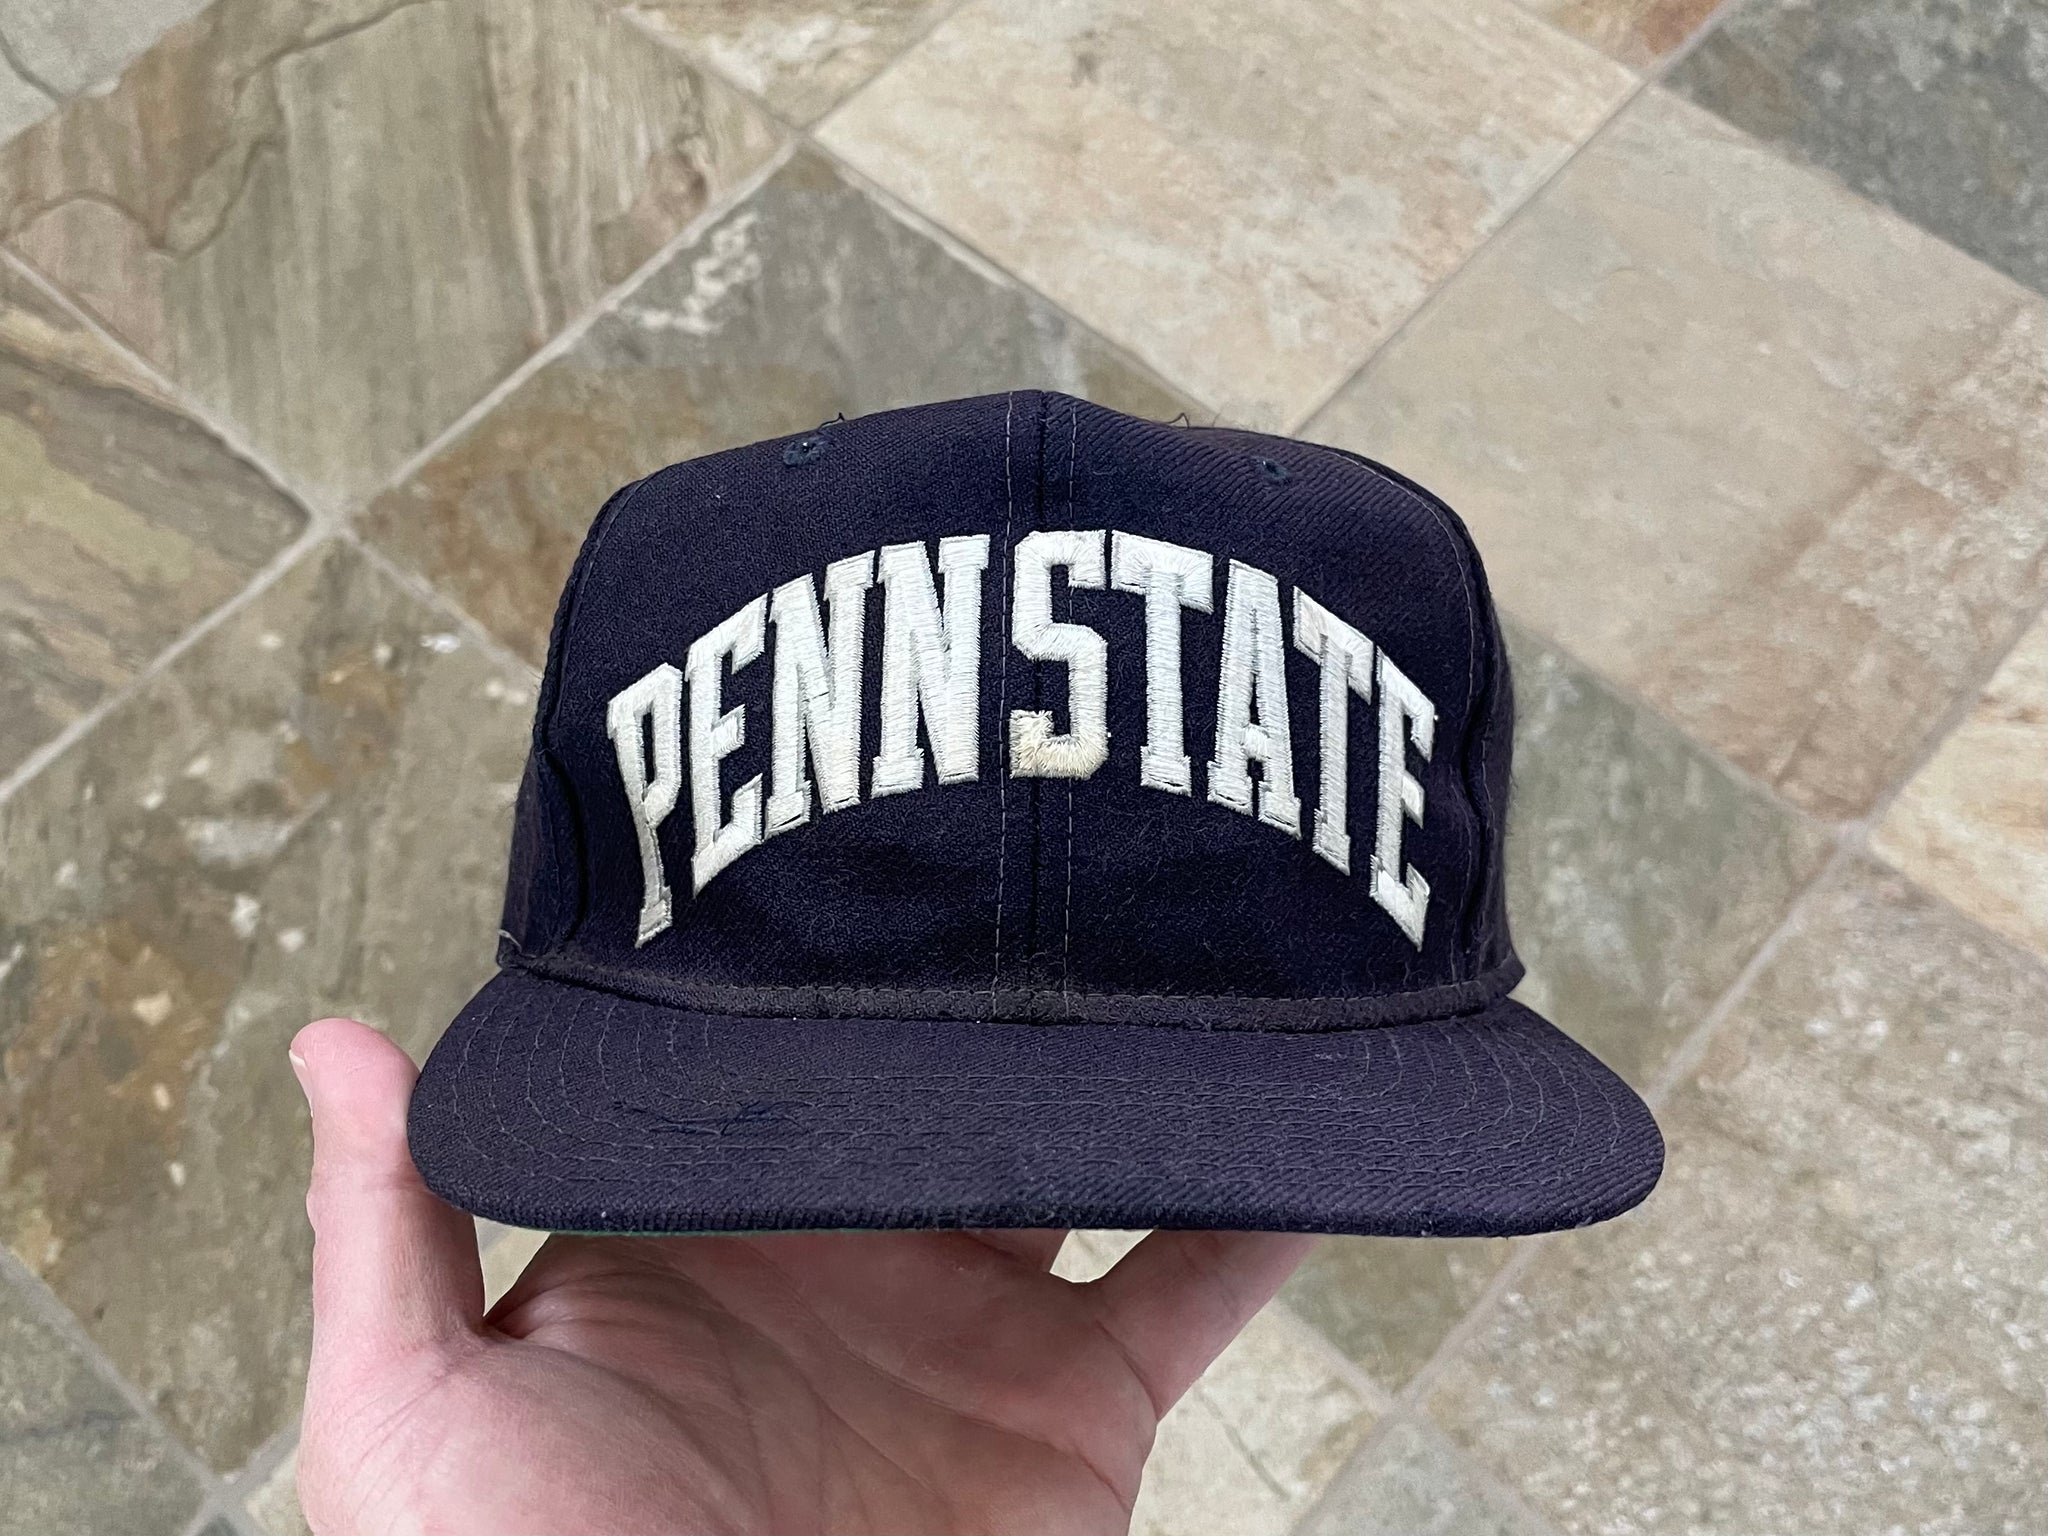 Vintage penn state shadow hat by SS